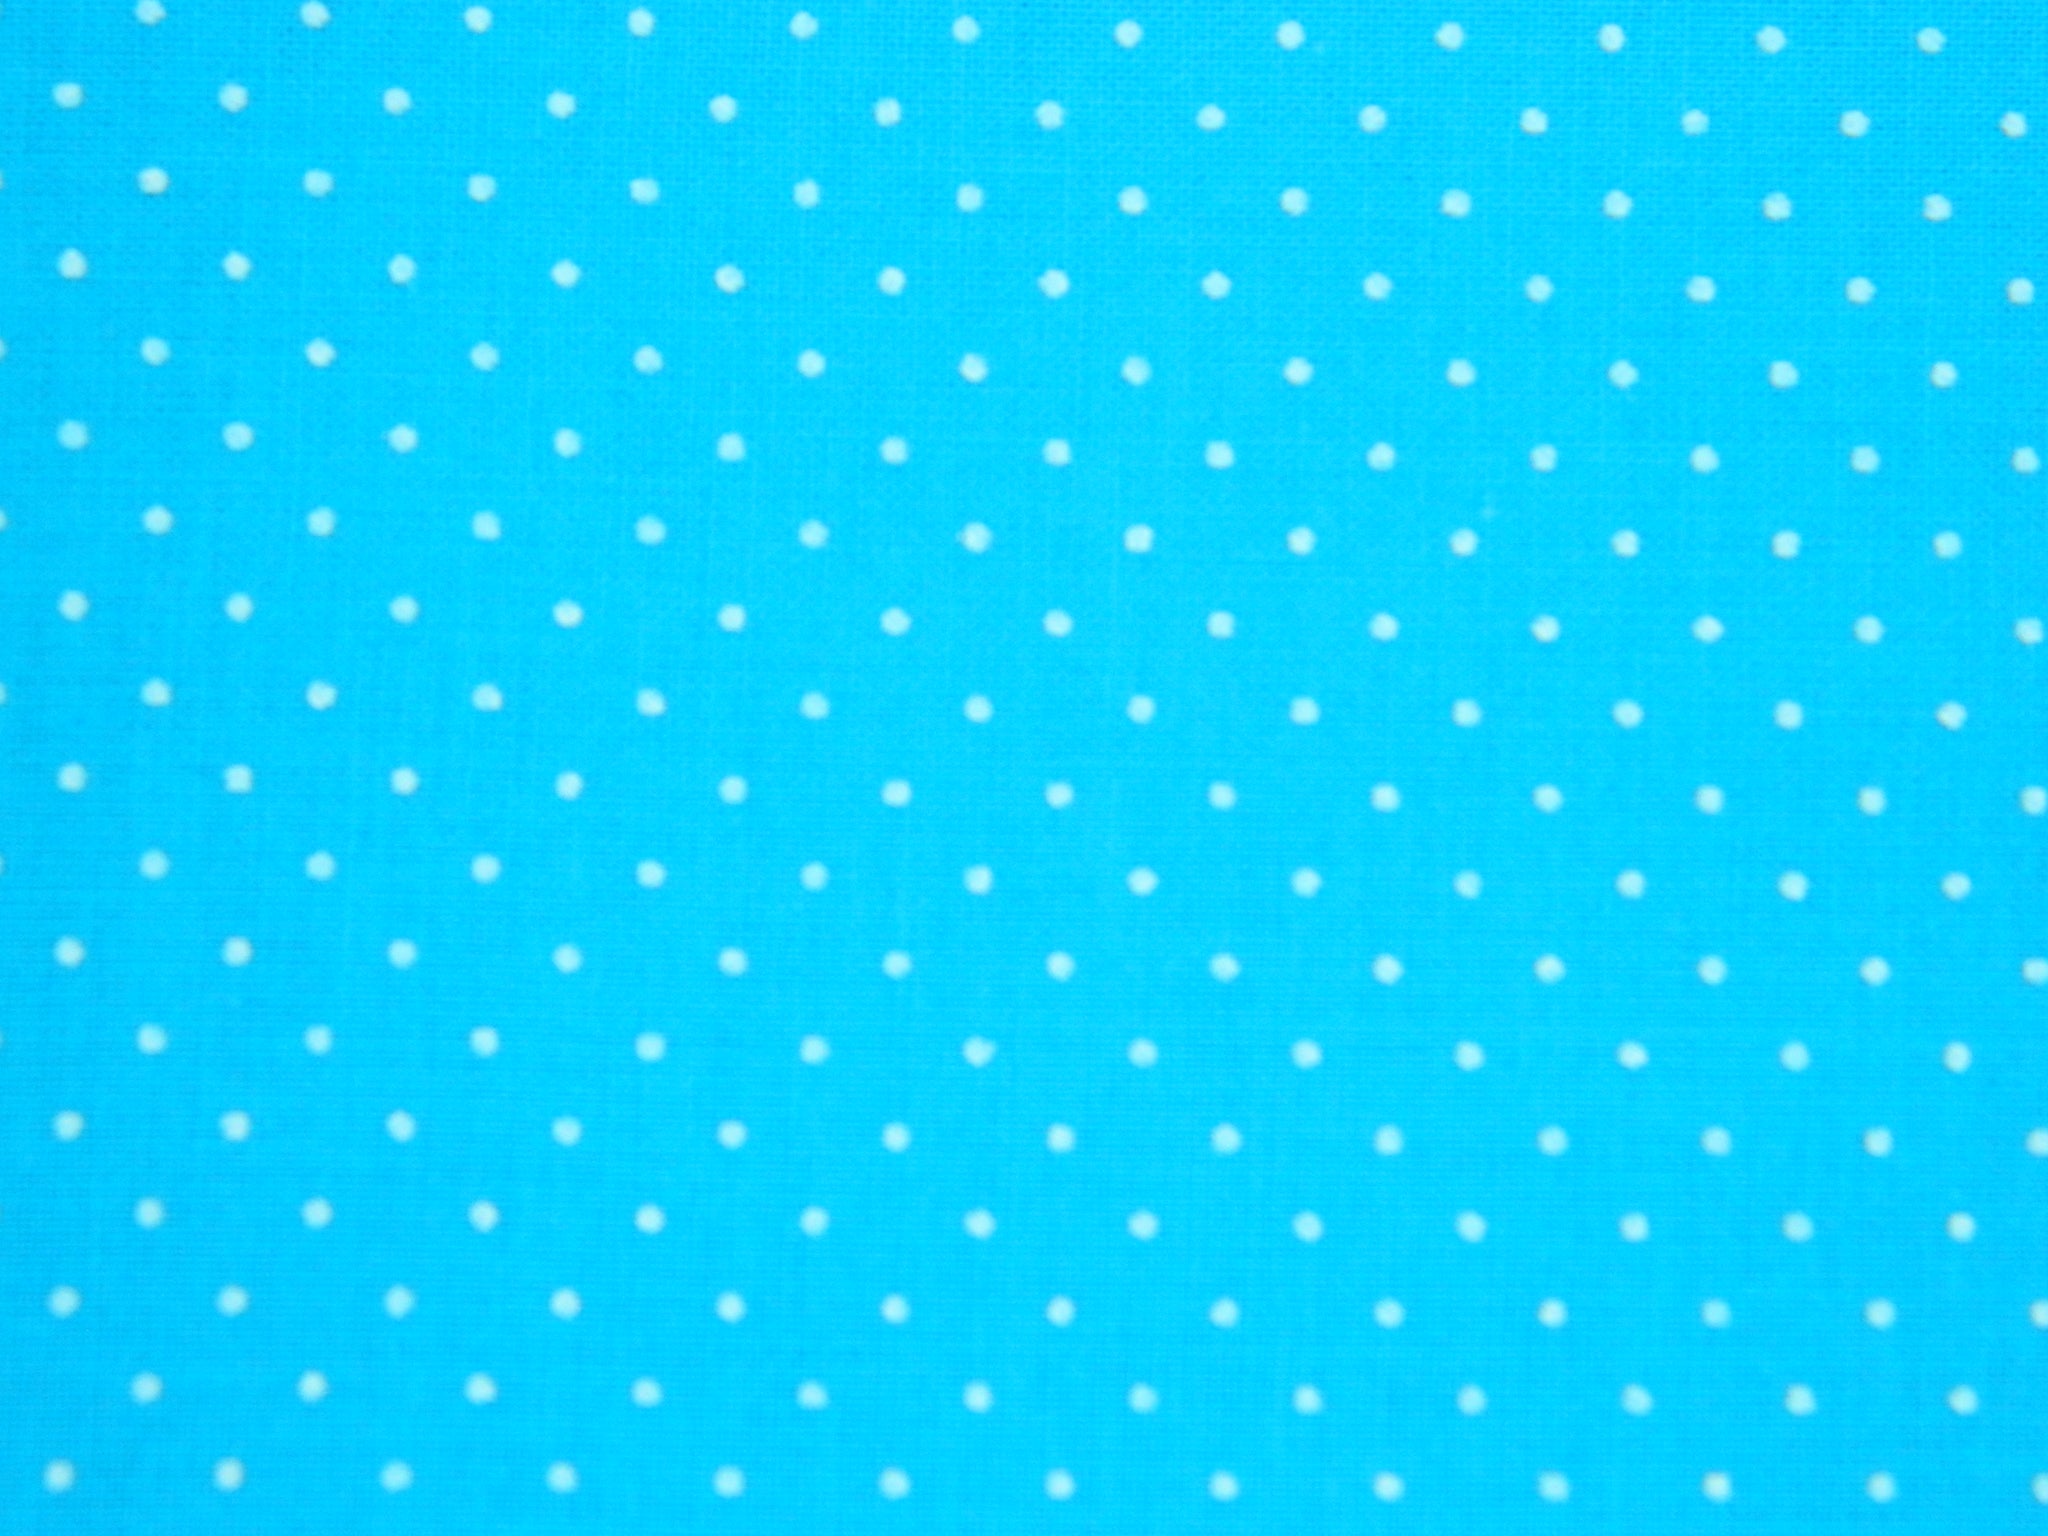 Blue with white dots KK0101986 247